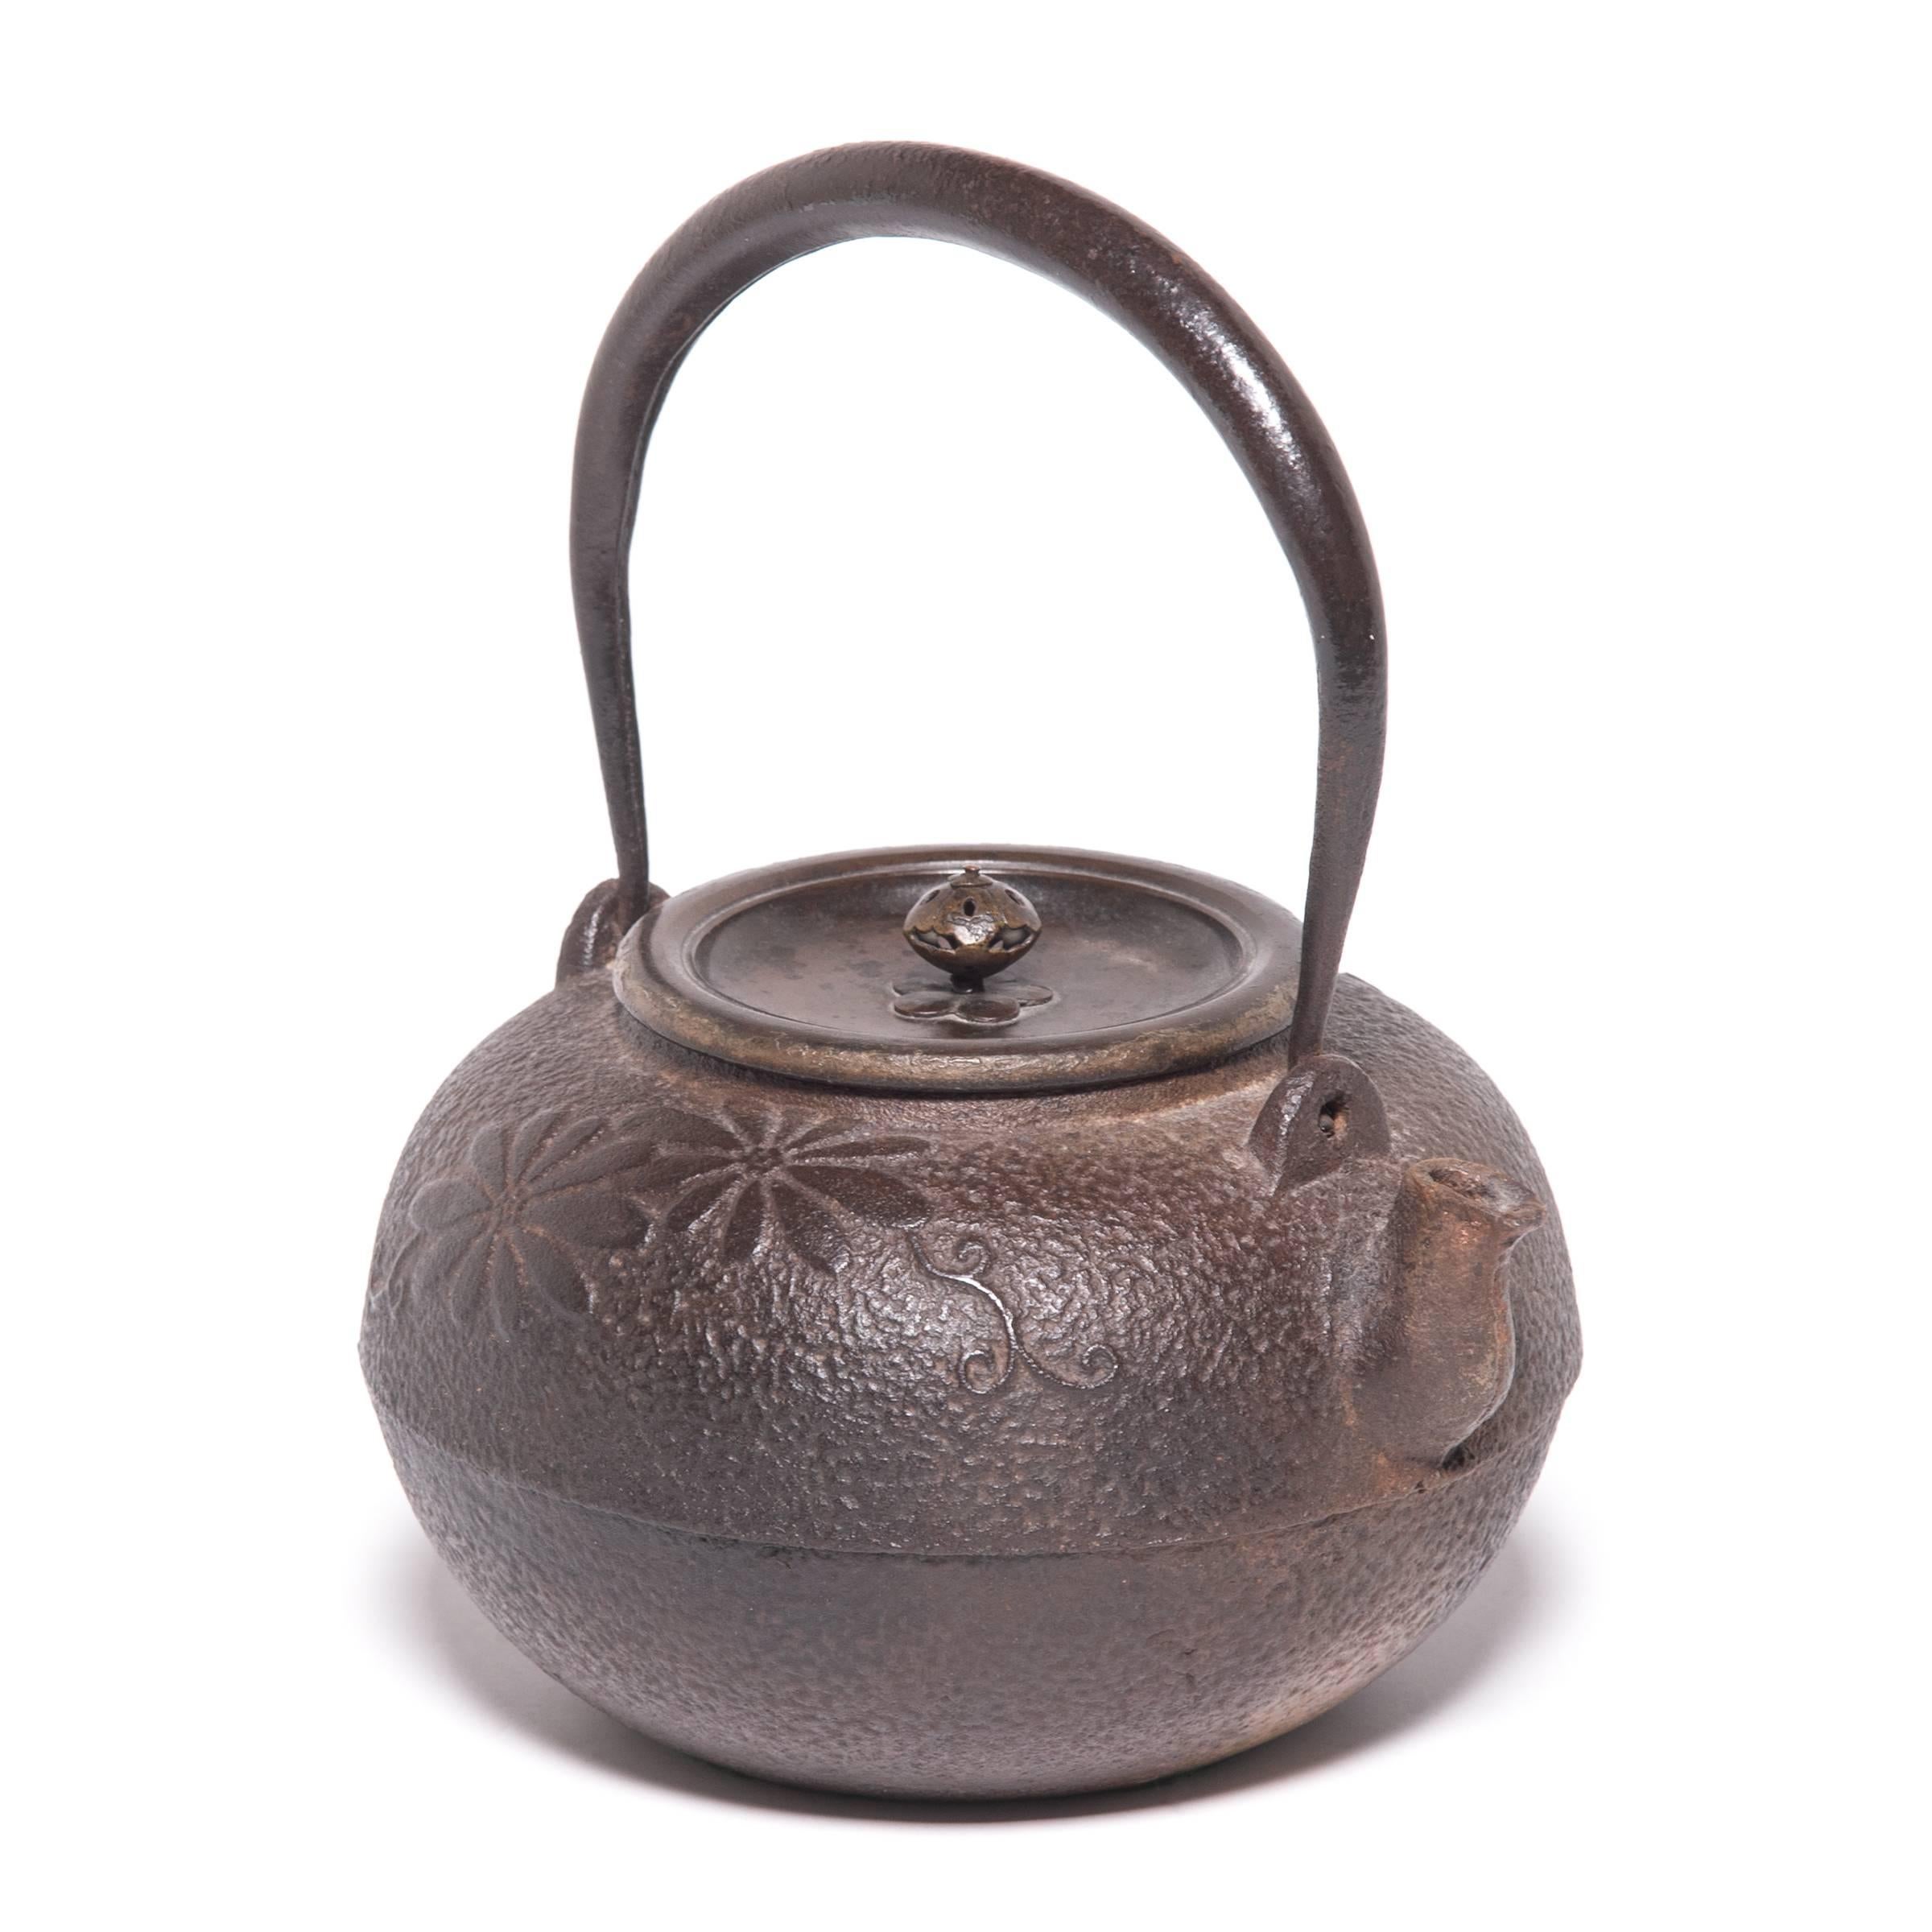 Decorated with stylized chrysanthemum blossoms, symbols of longevity and rejuvenation, this Japanese teapot was used to boil water for traditional tea ceremonies. Known as tetsubin, the kettle’s cast-iron construction is said to change the quality